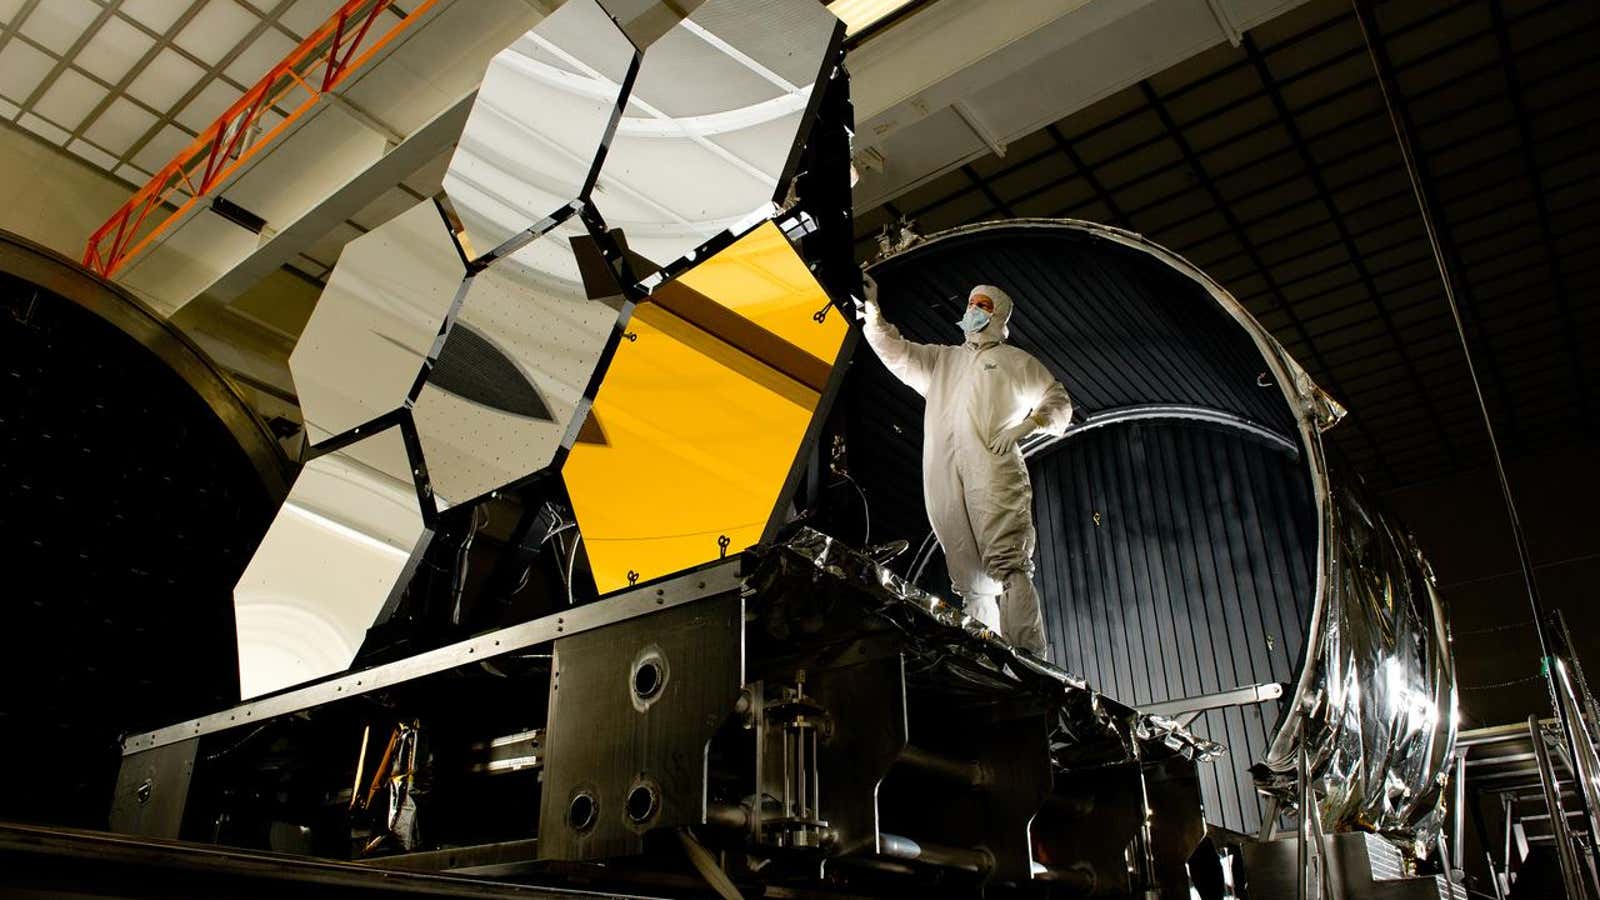 NASA’s new space telescope is 14 years late and 1000% over budget